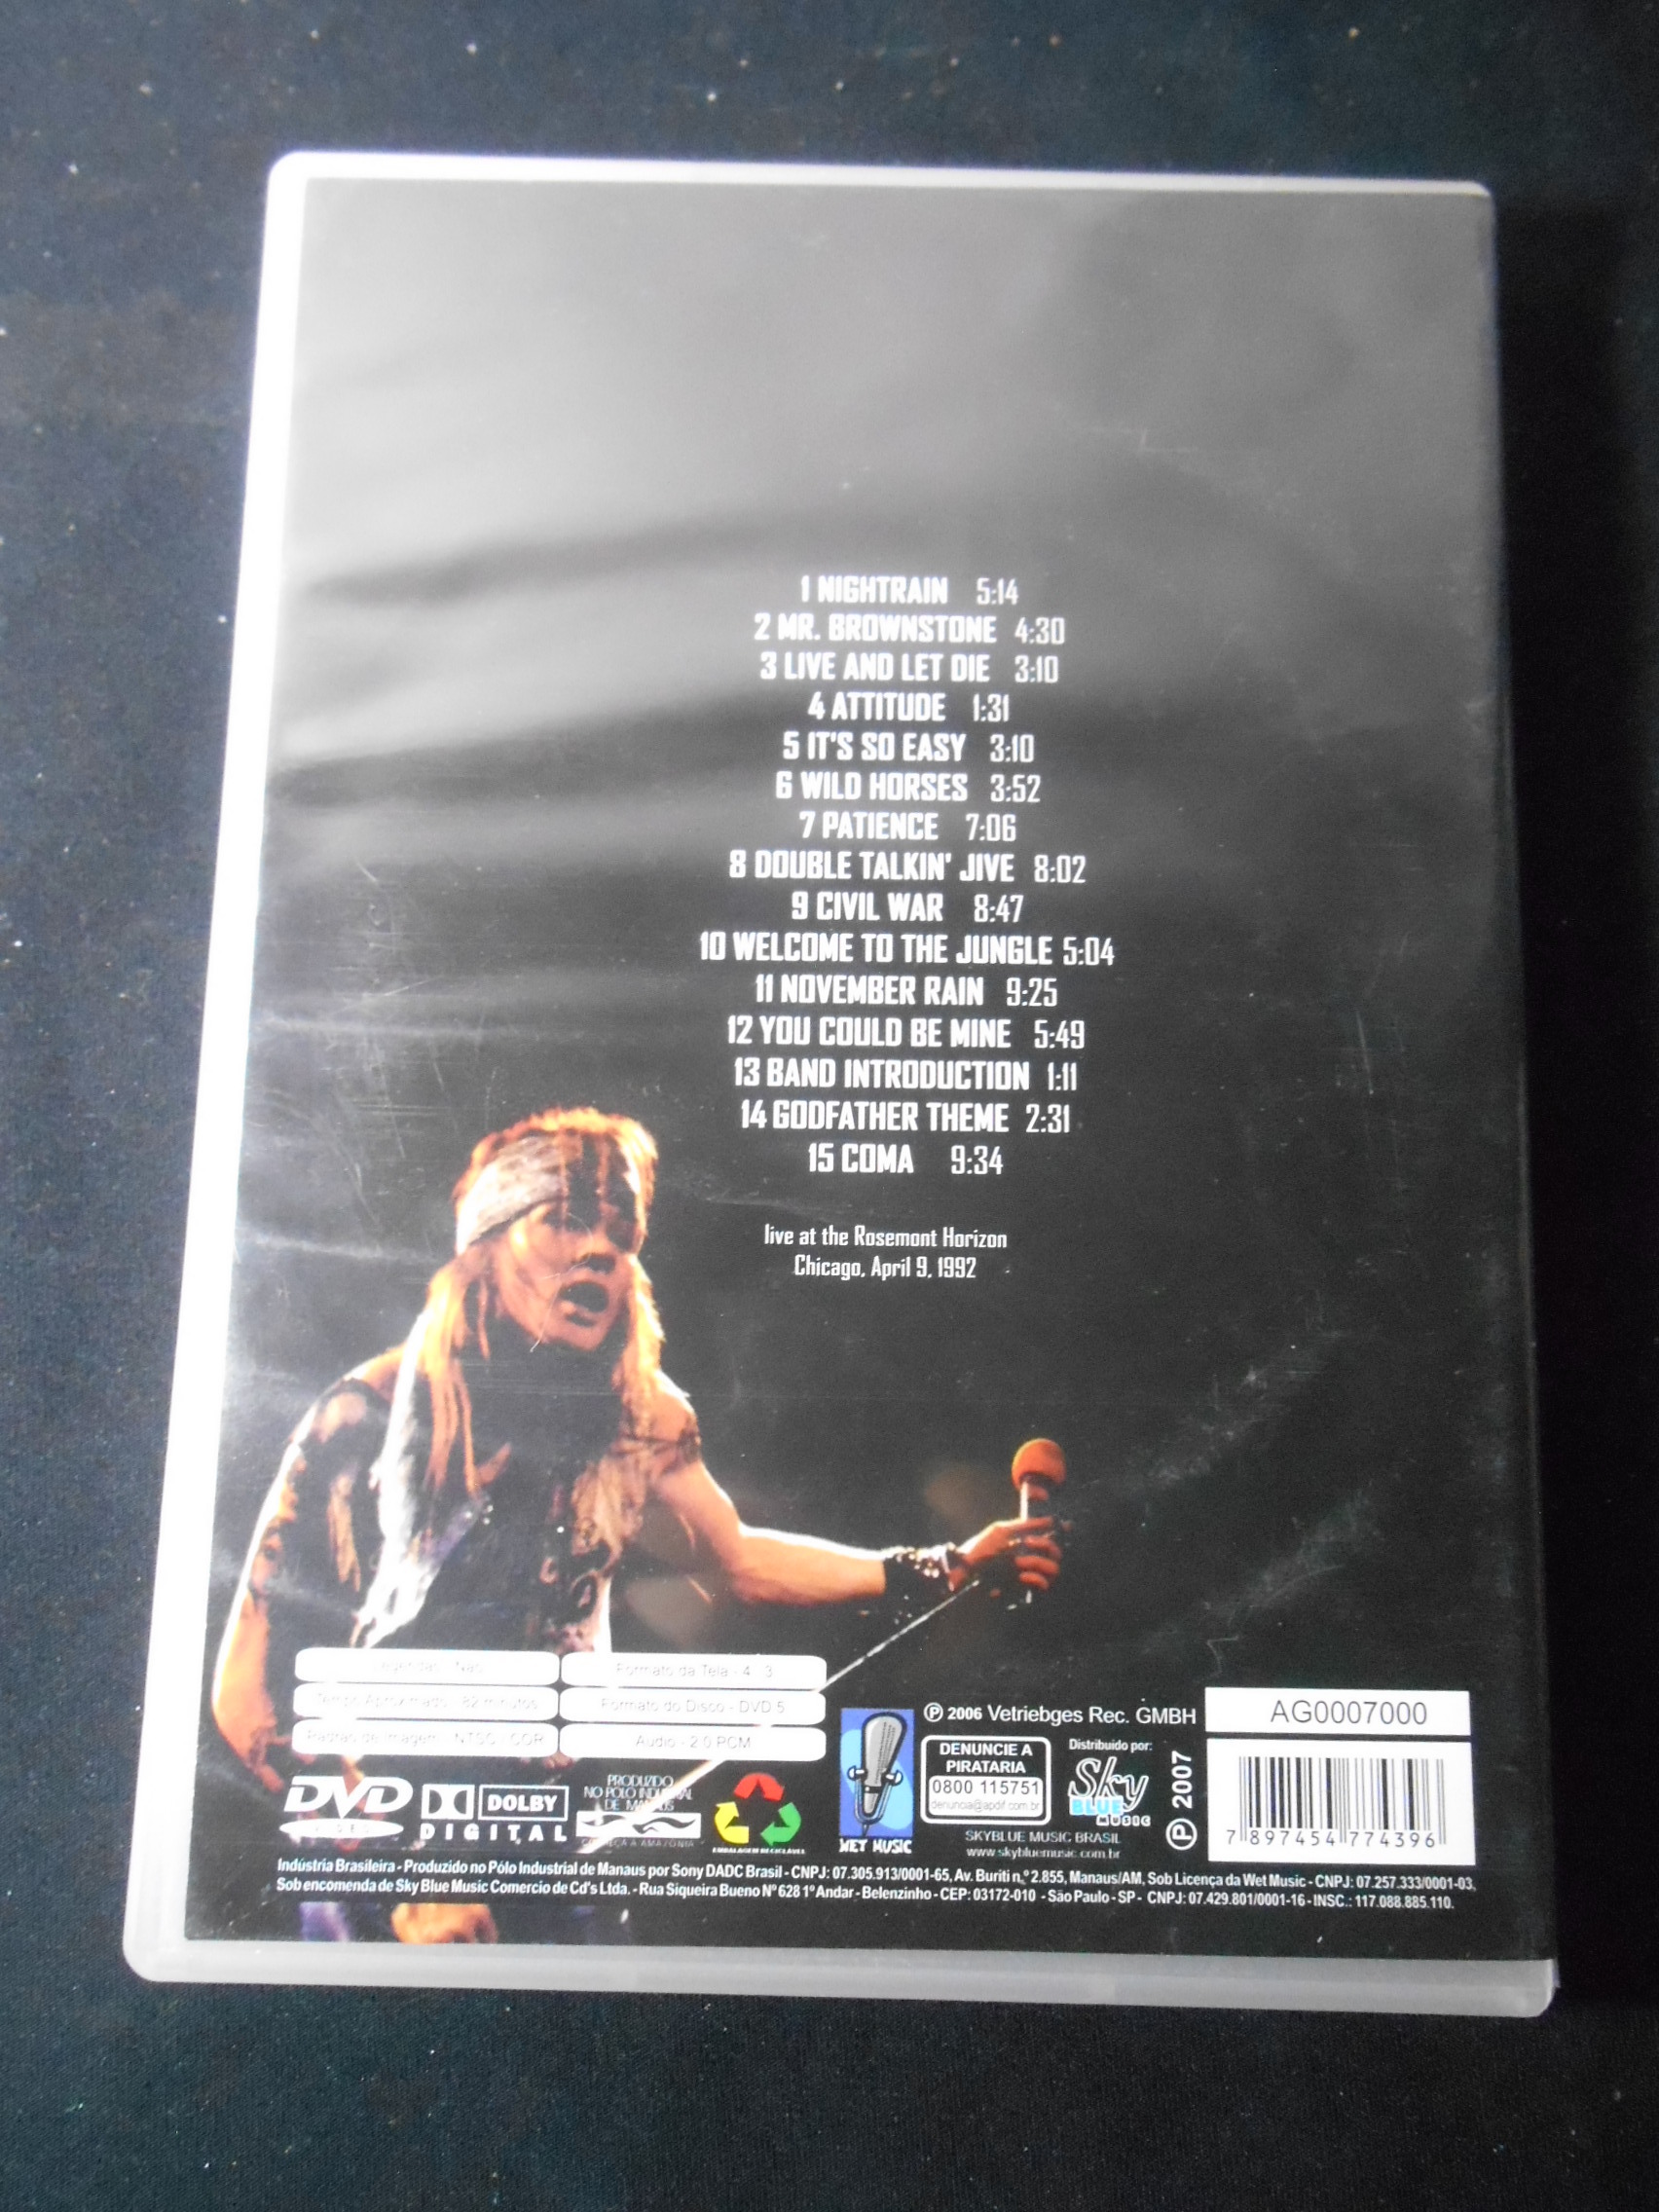 DVD - Guns and Roses - Live In Chicago